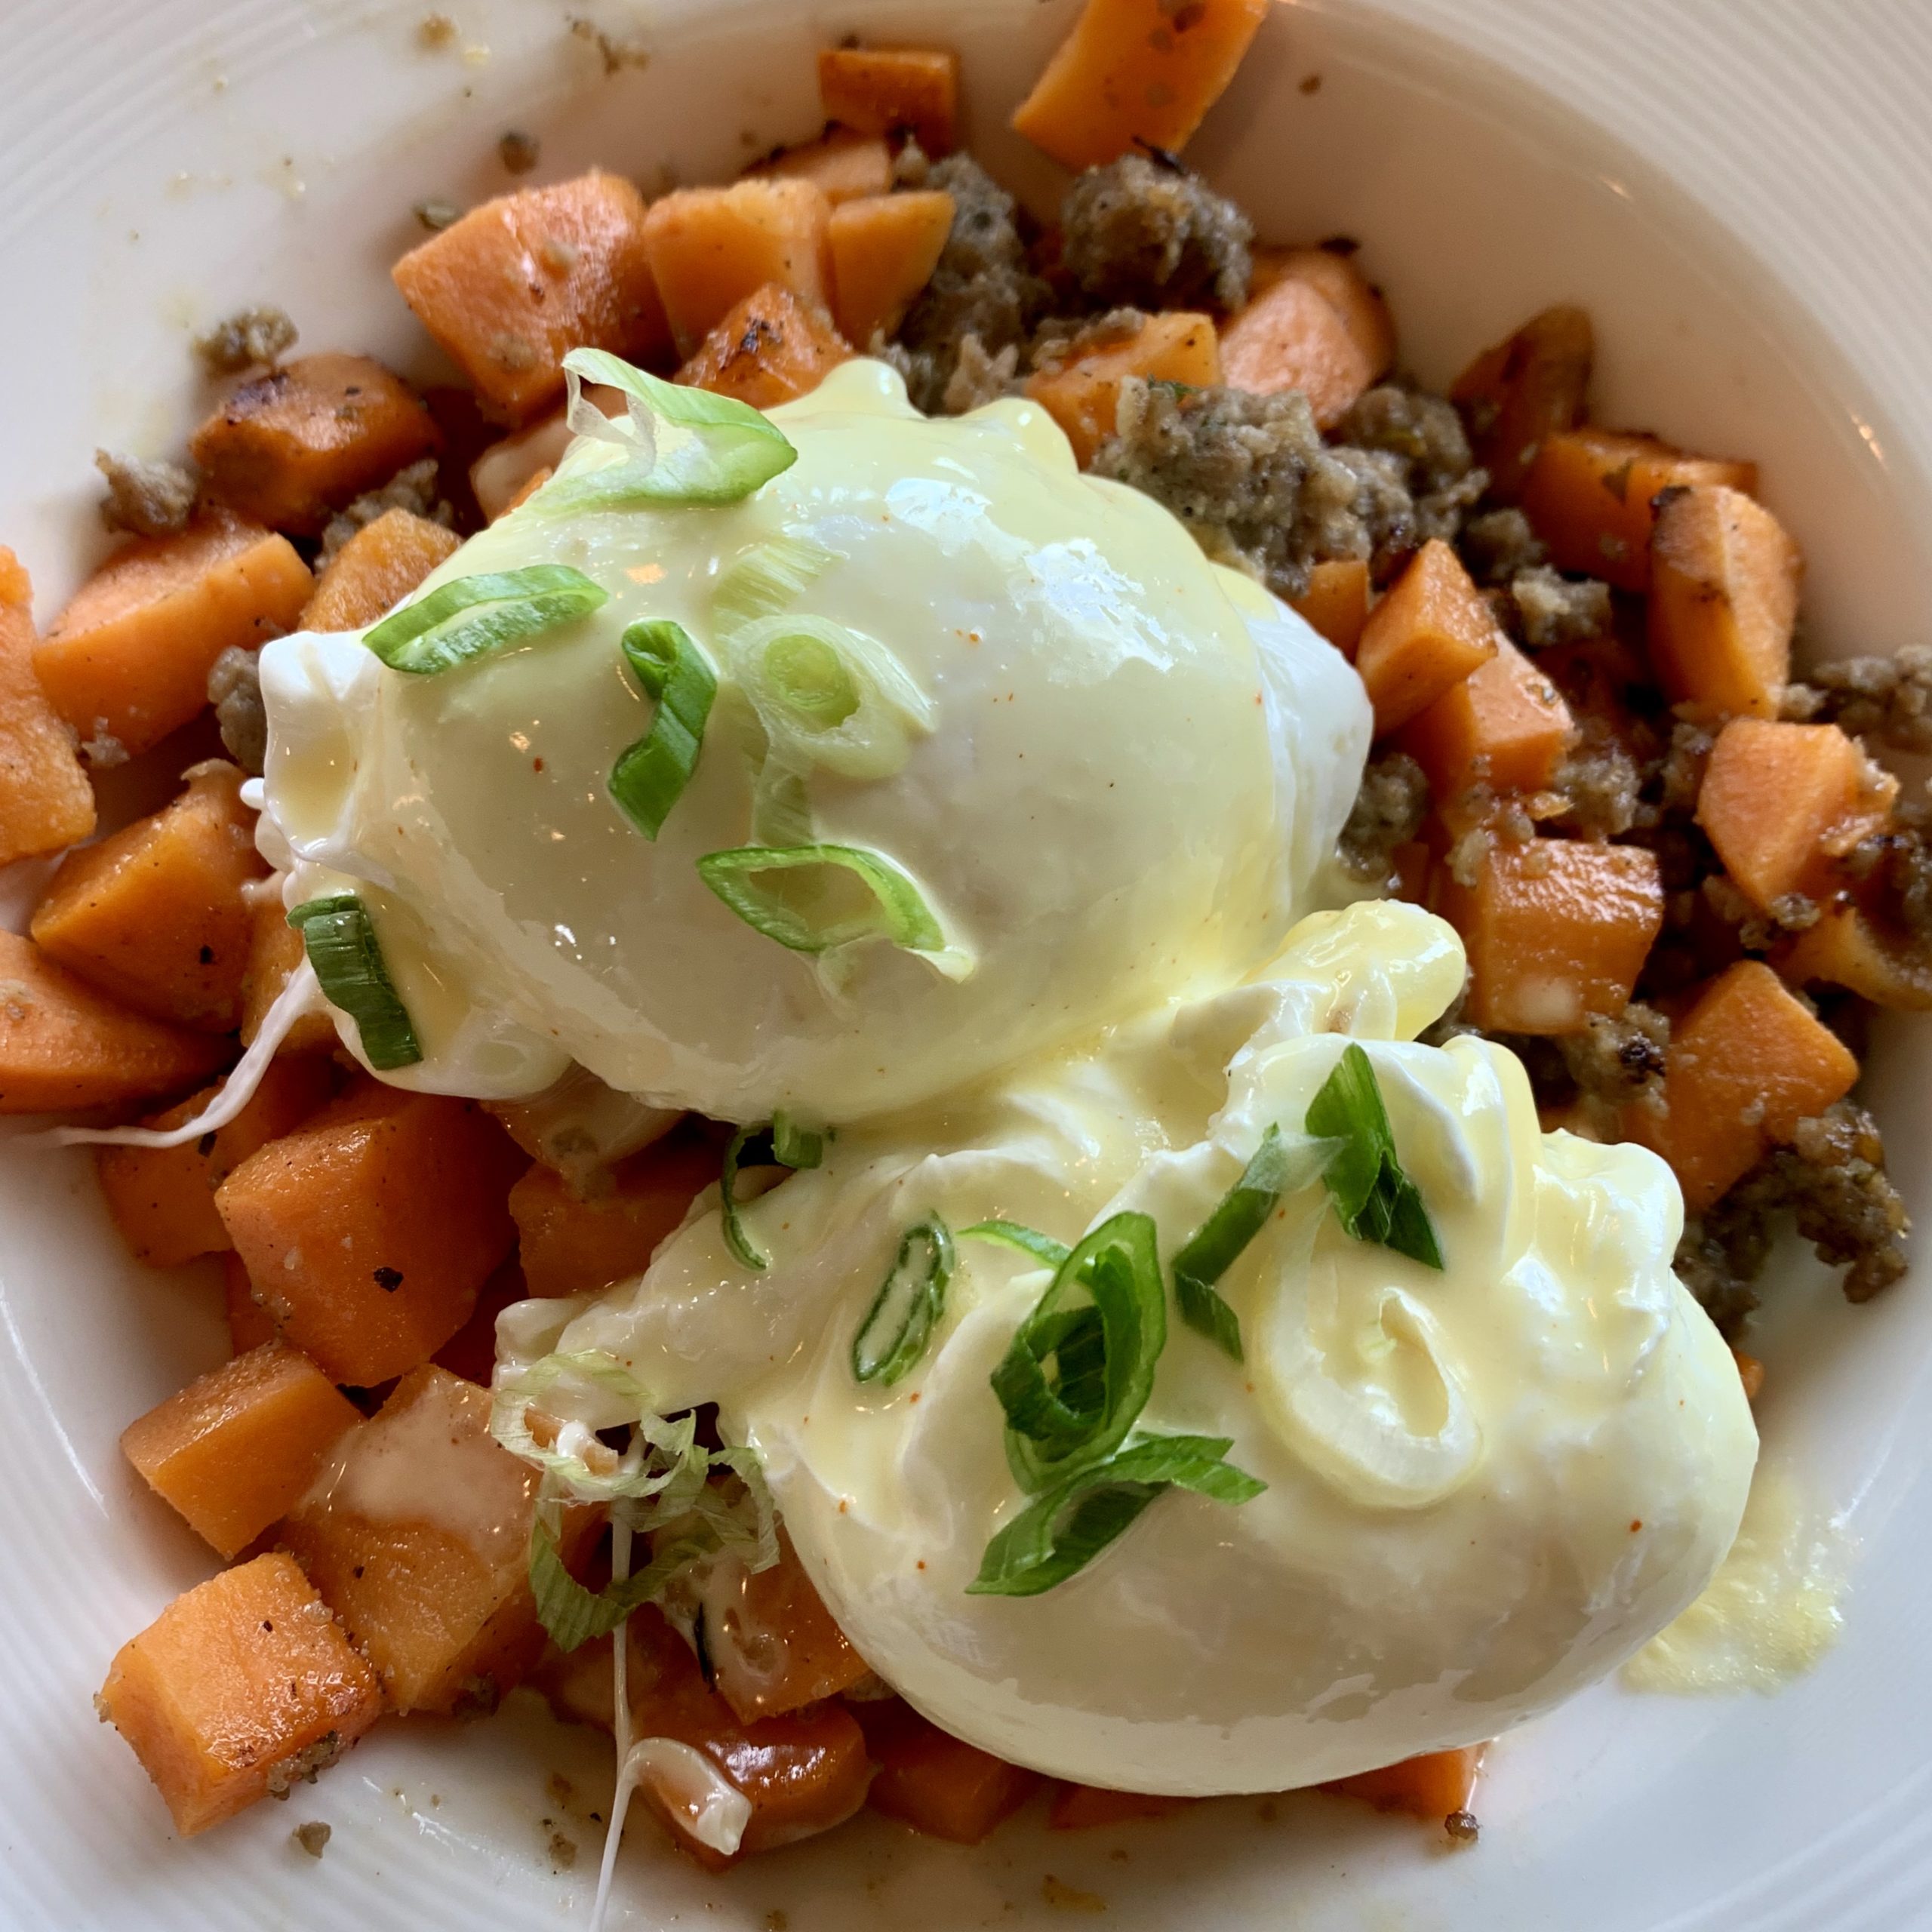 Sweet Potato Hash with sausage and eggs is a meal I had while on a girl's weekend up in Petosky, Michigan last fall.